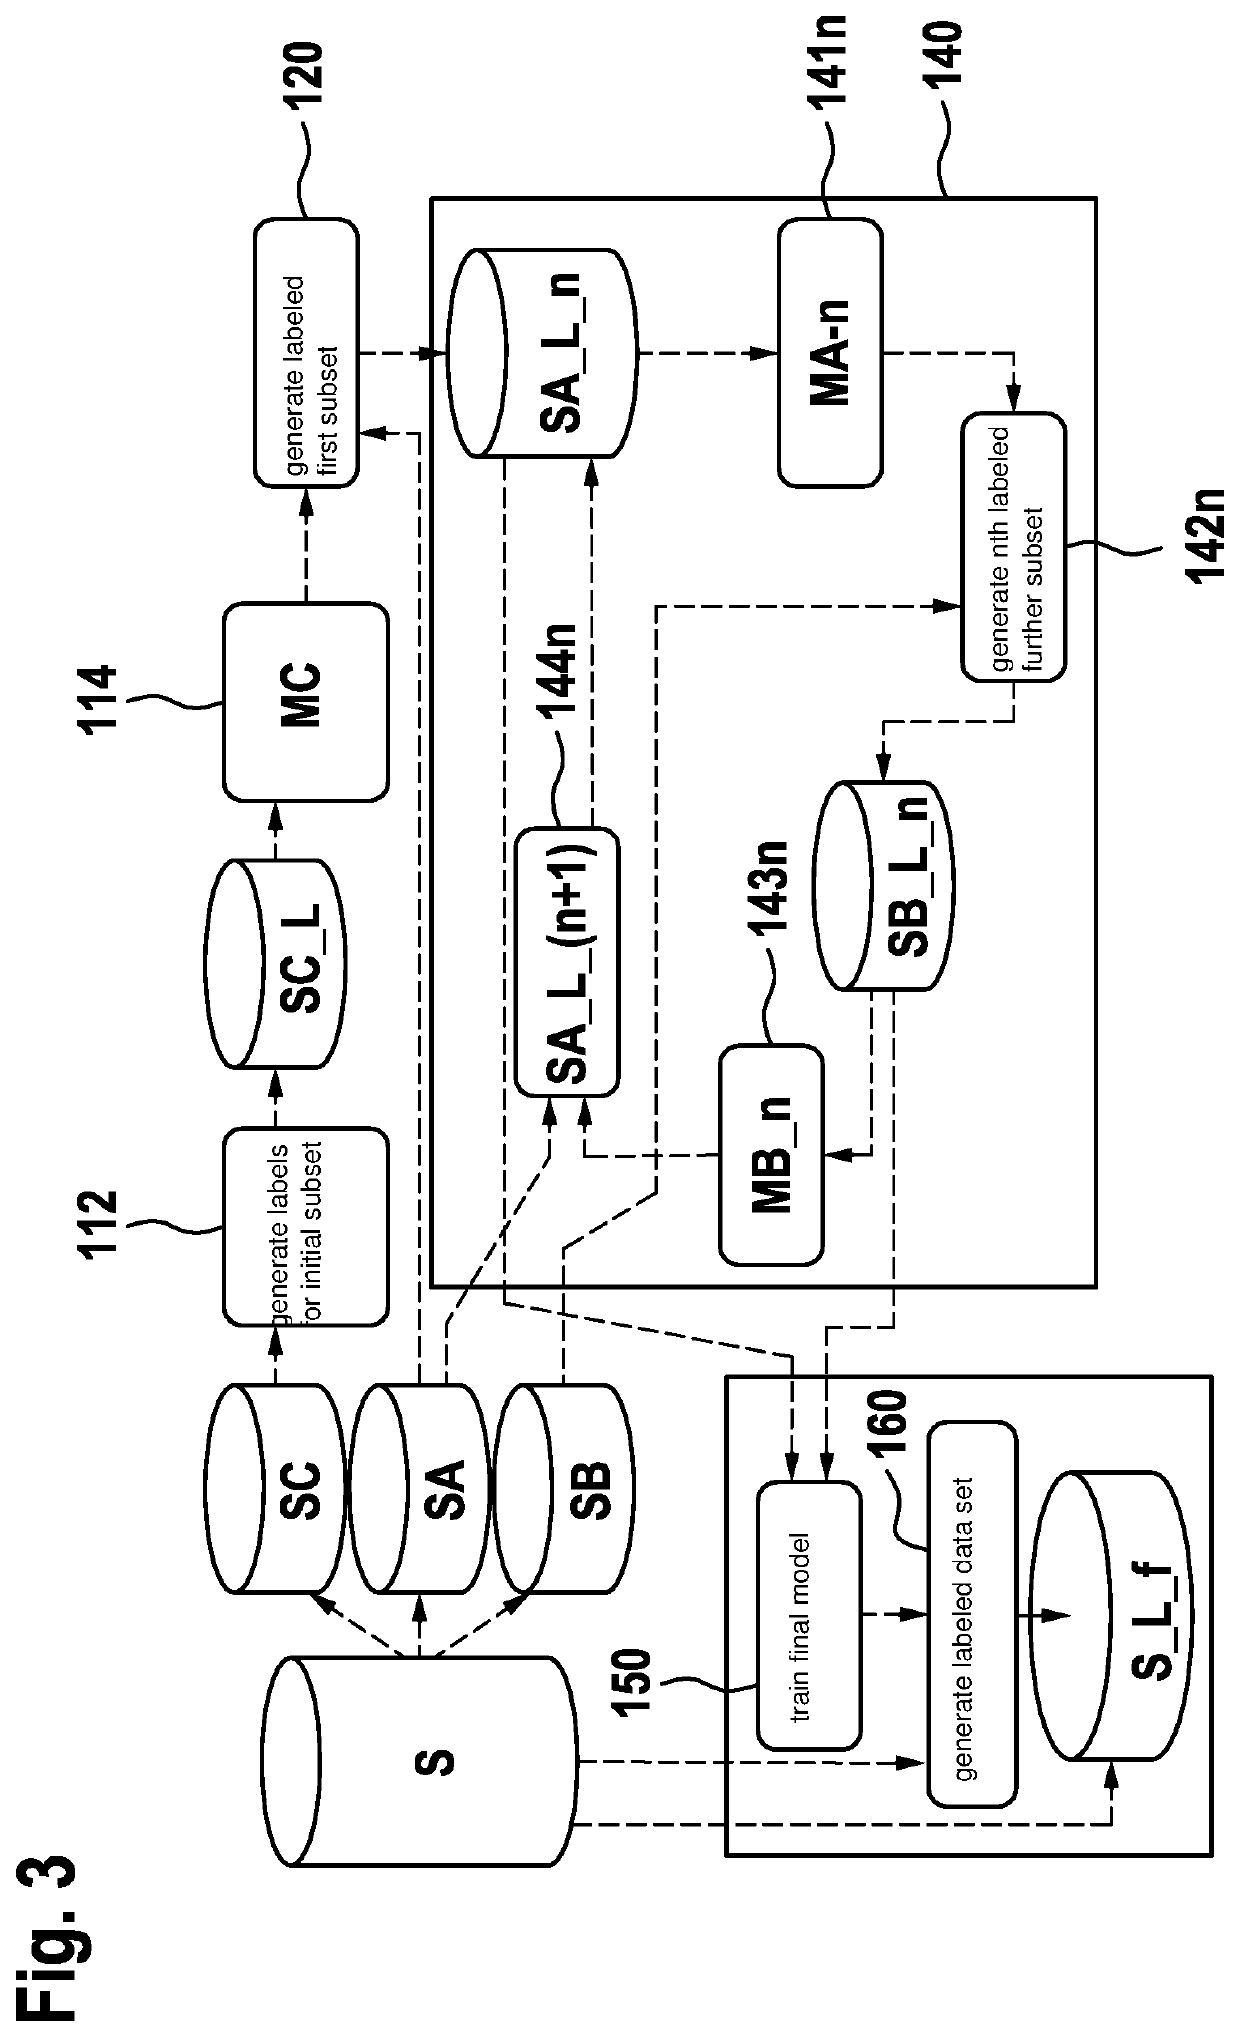 Method for generating labeled data, in particular for training a neural network, by using unlabeled partitioned samples